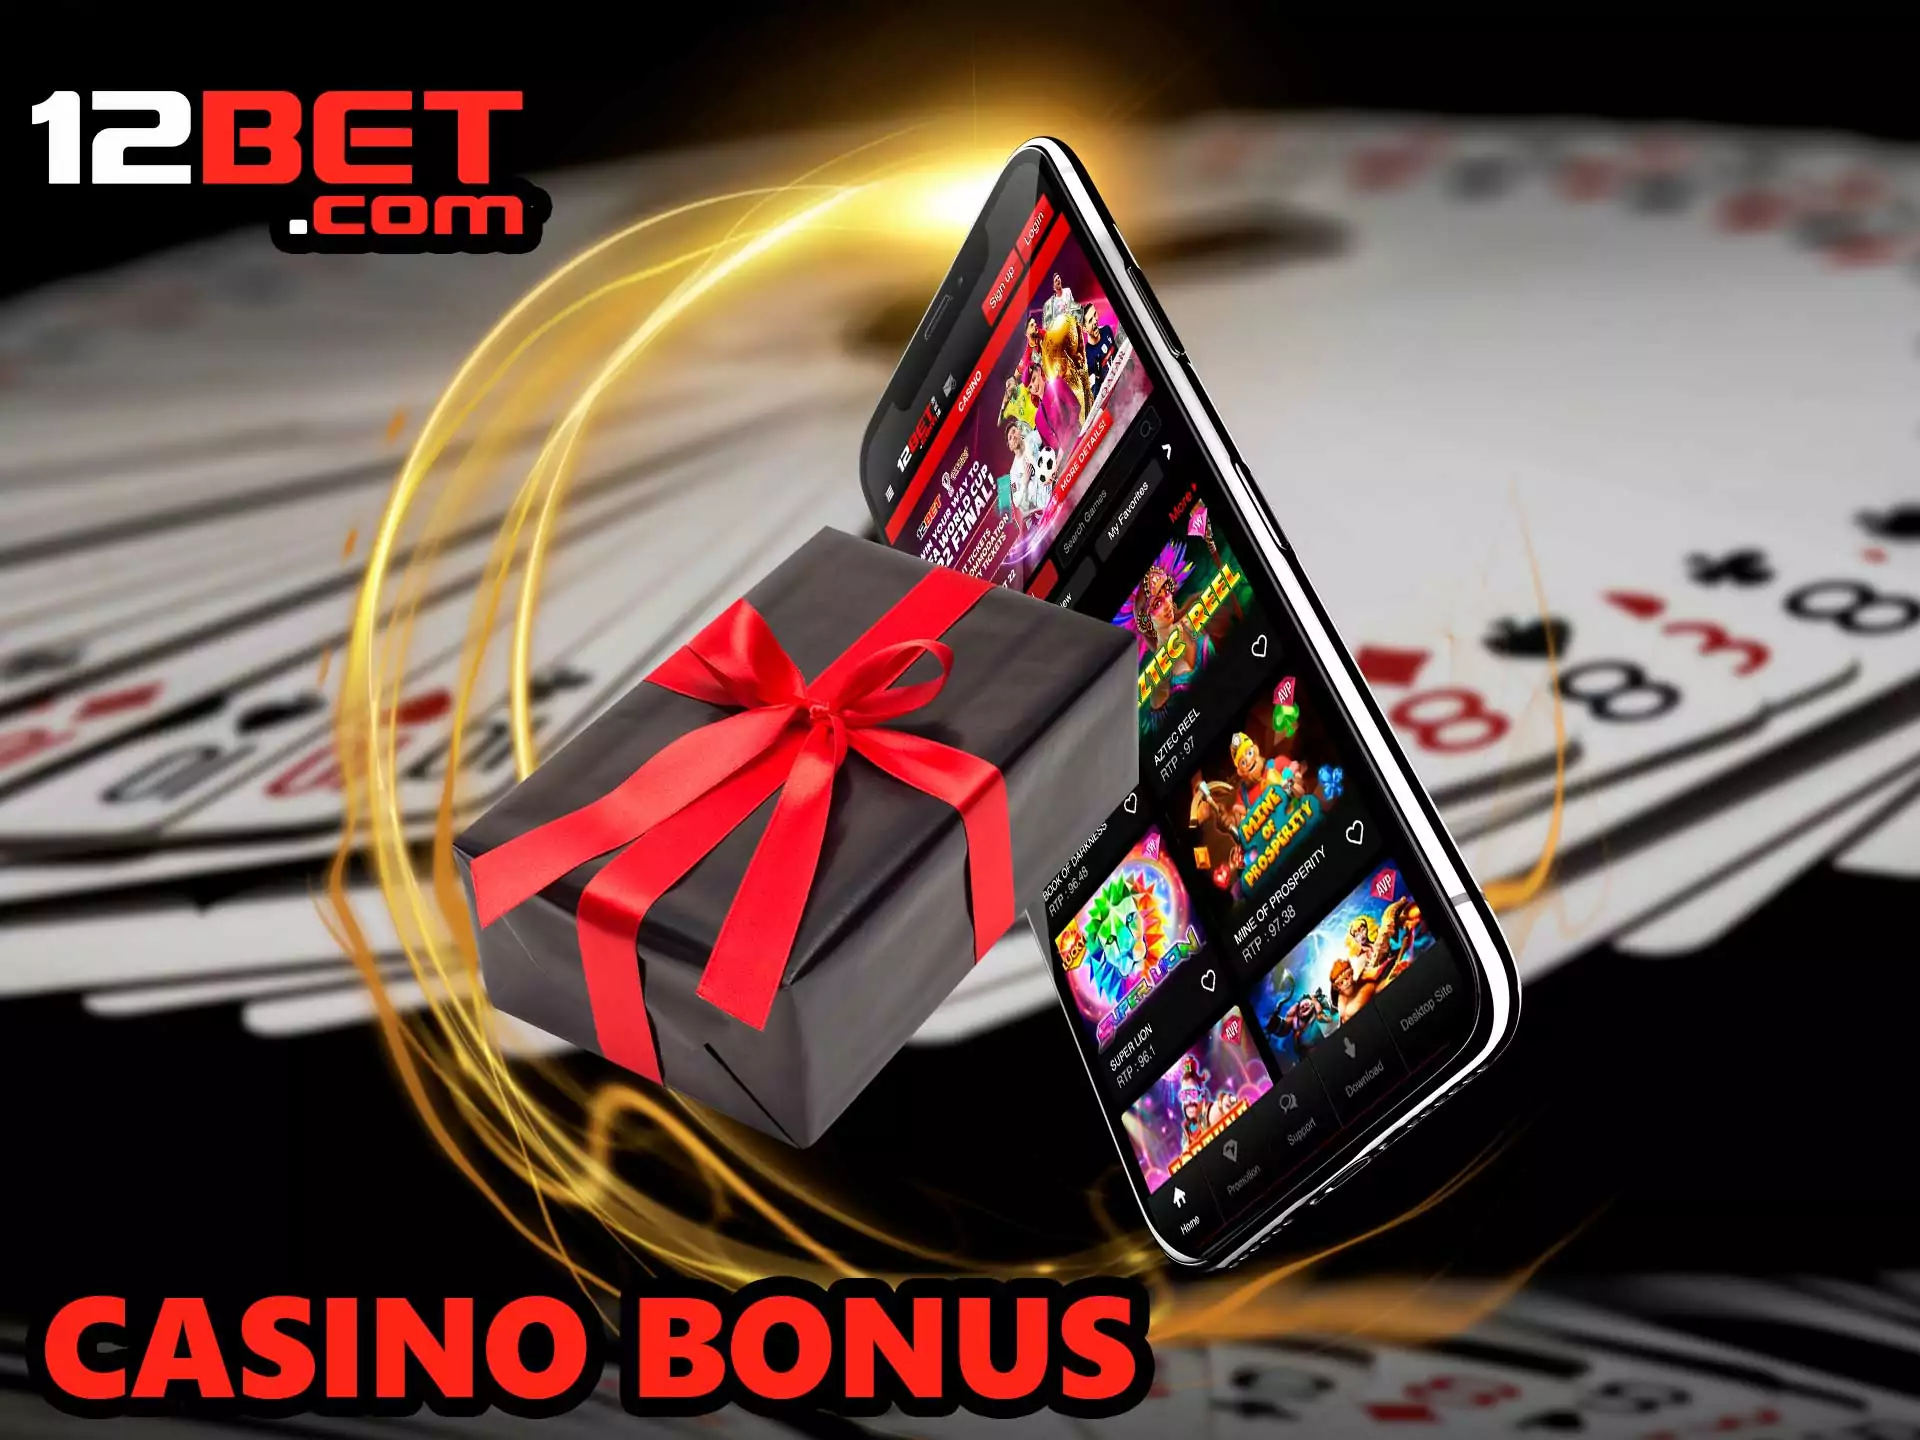 Casino lovers get a generous bookmaker bonus of 100% up to INR 8,500, just choose the casino you like best and make a deposit.